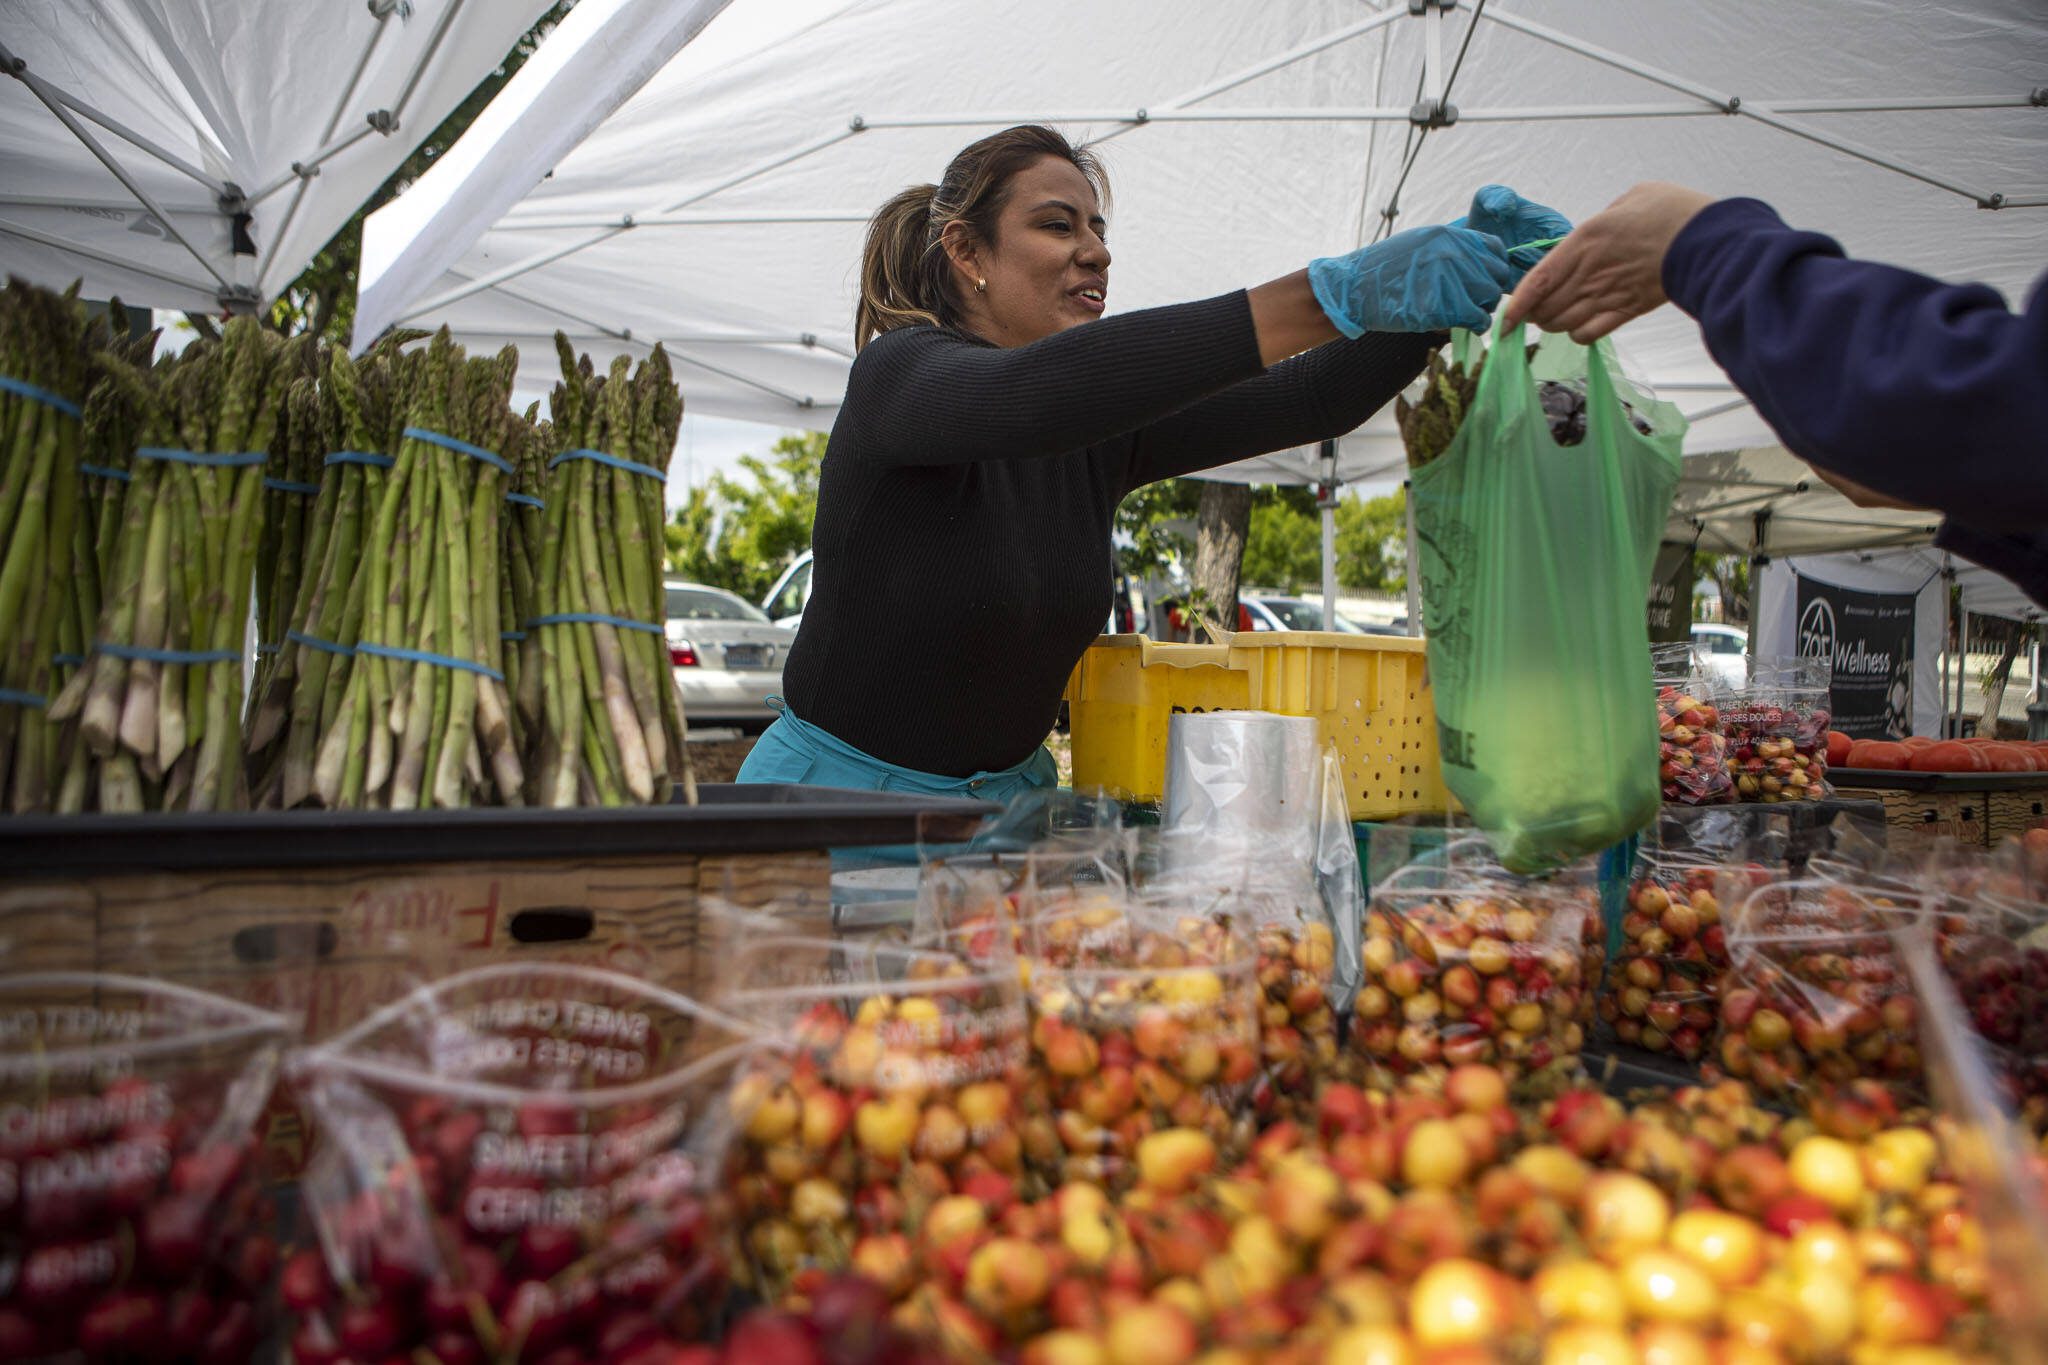 Patricia Robles of Cazares Farms hands a bag to a patron at the Everett Farmers Market across from the Everett Station in Everett in June 2023. A new federal program will provide eligble families an EBT card good at grocery stores and farmers markets to supplement summer meals for kids while they are not in school. (Annie Barker / The Herald file photo)